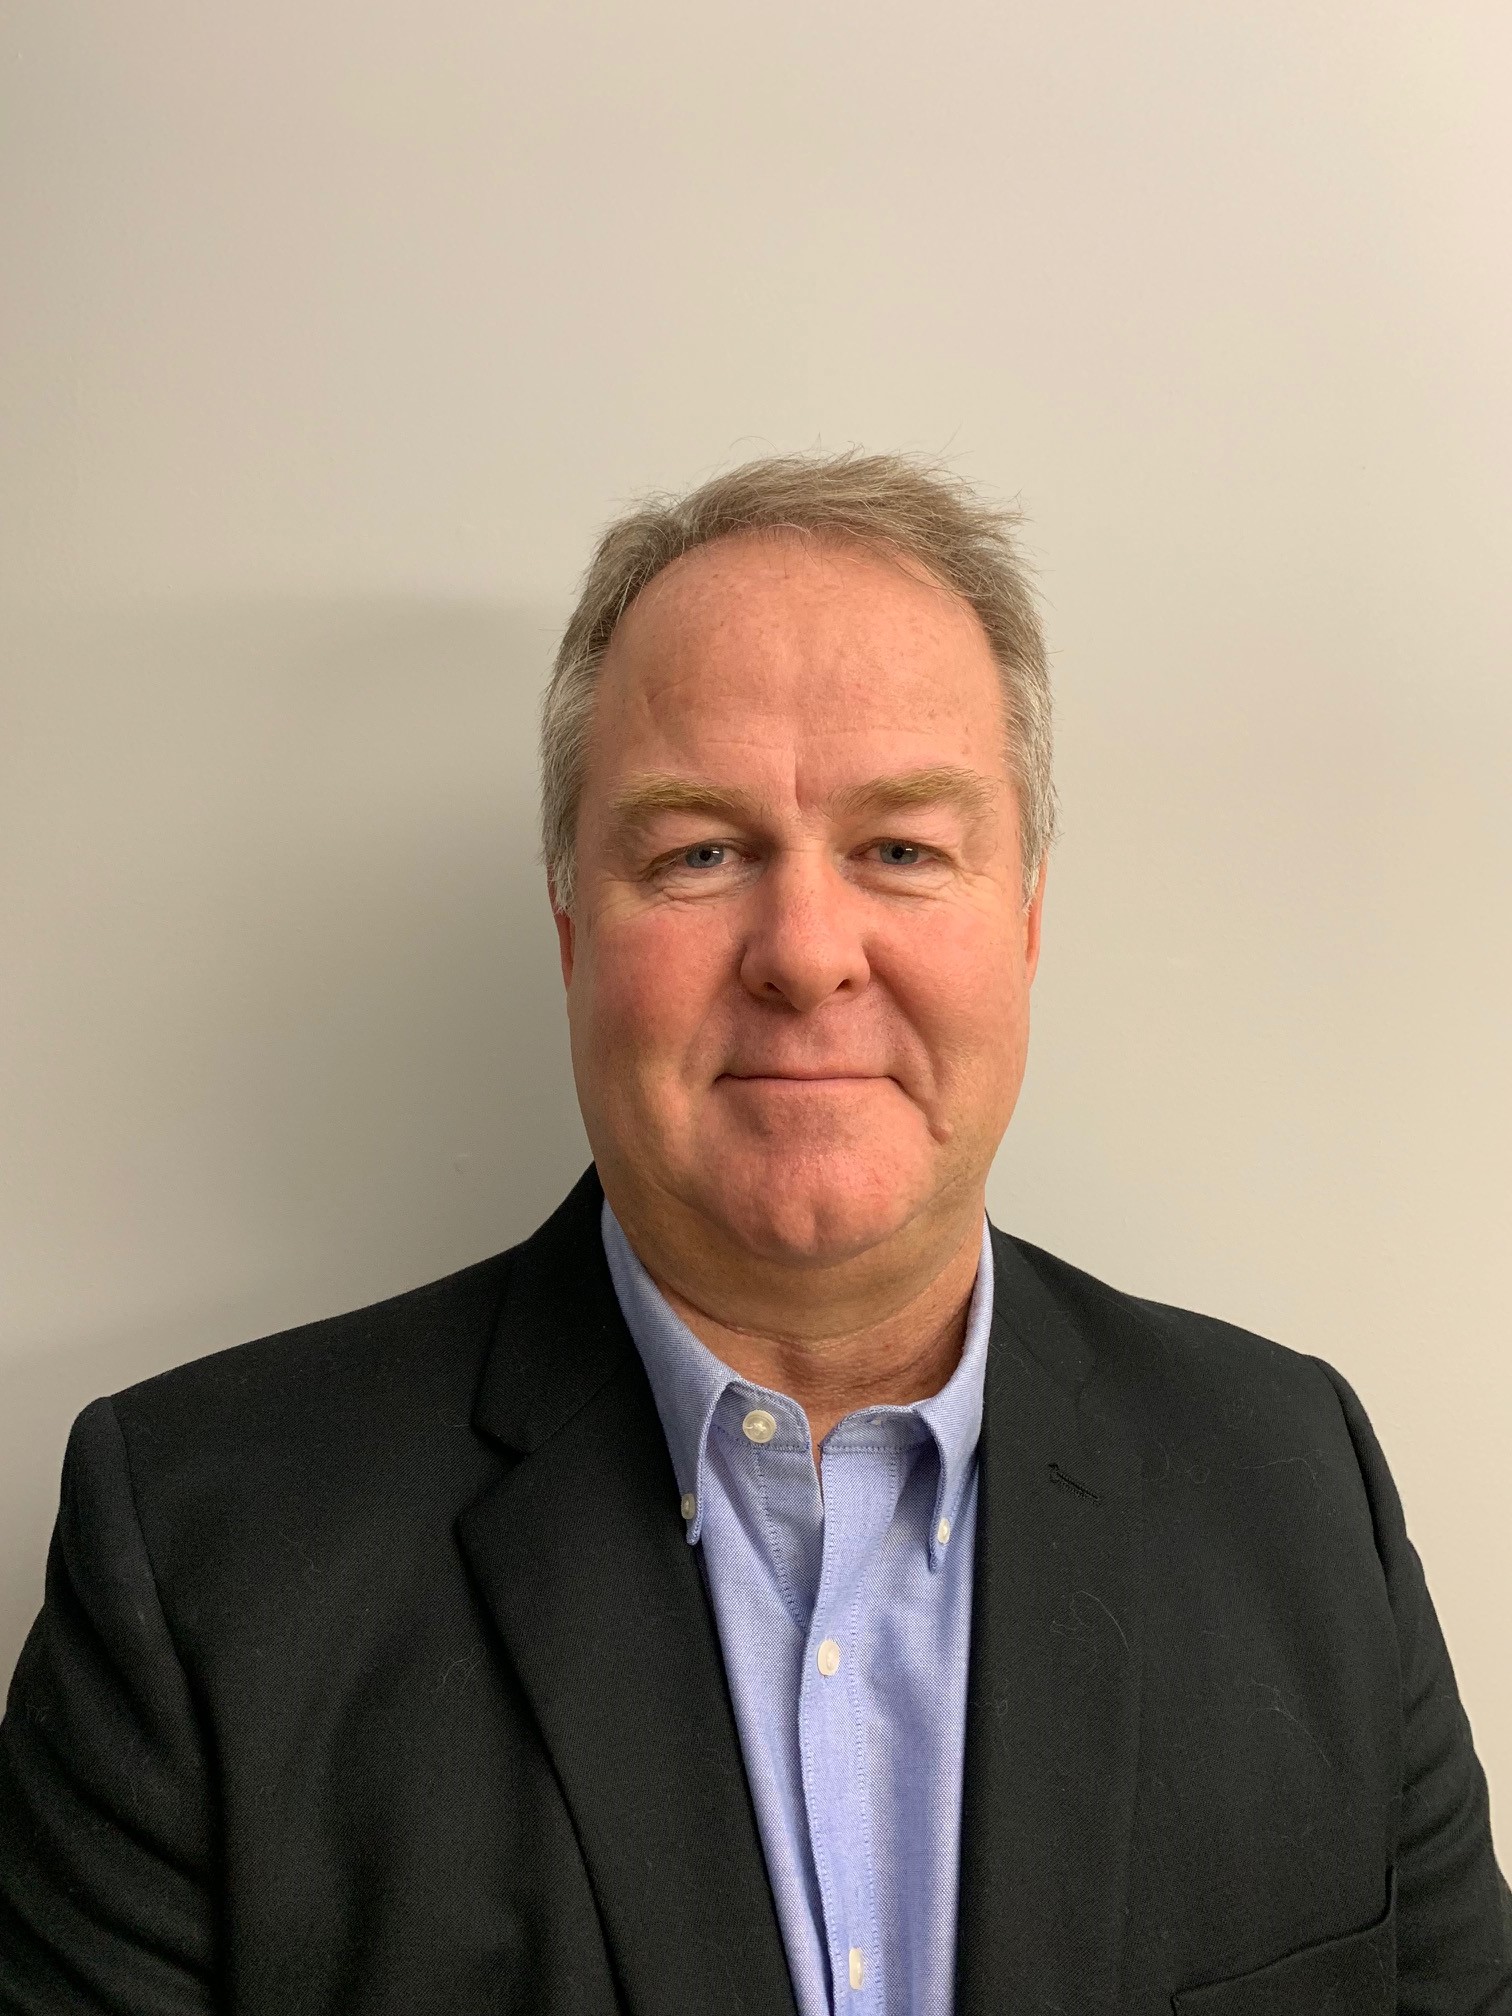 General Equipment Company, manufacturers of extreme duty light construction equipment, is pleased to announce Greg Kunderman has joined the company as National Sales Manager